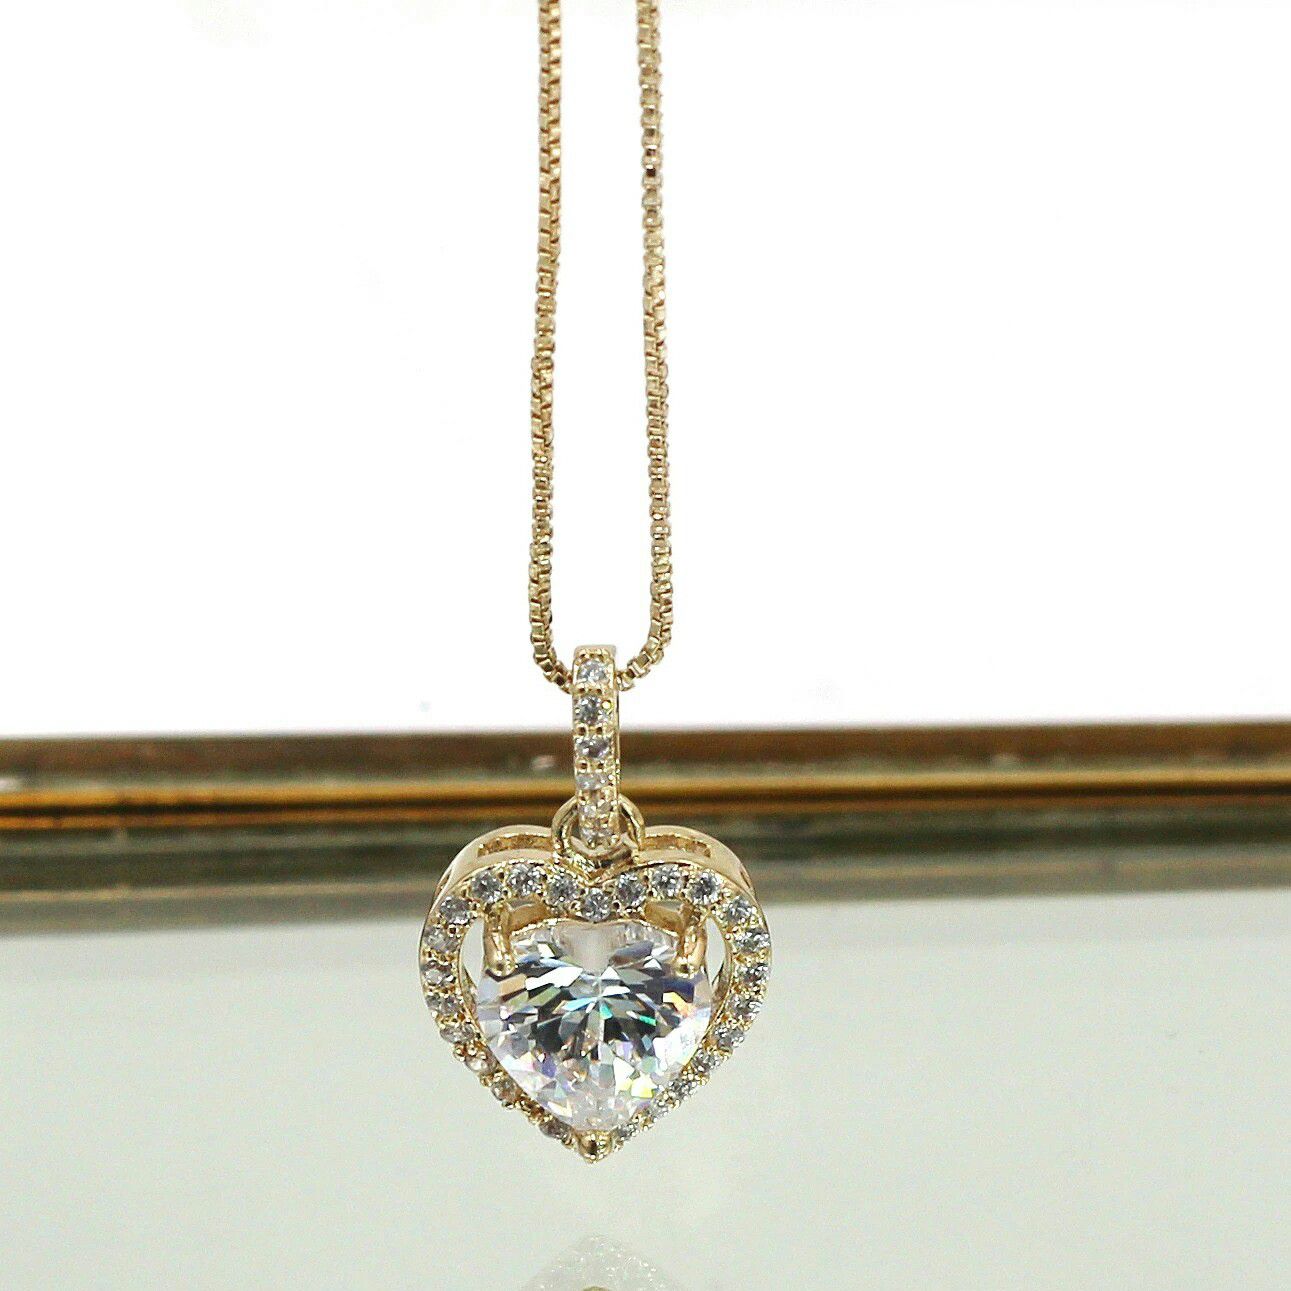 Lovely gold peach heart crystal necklace